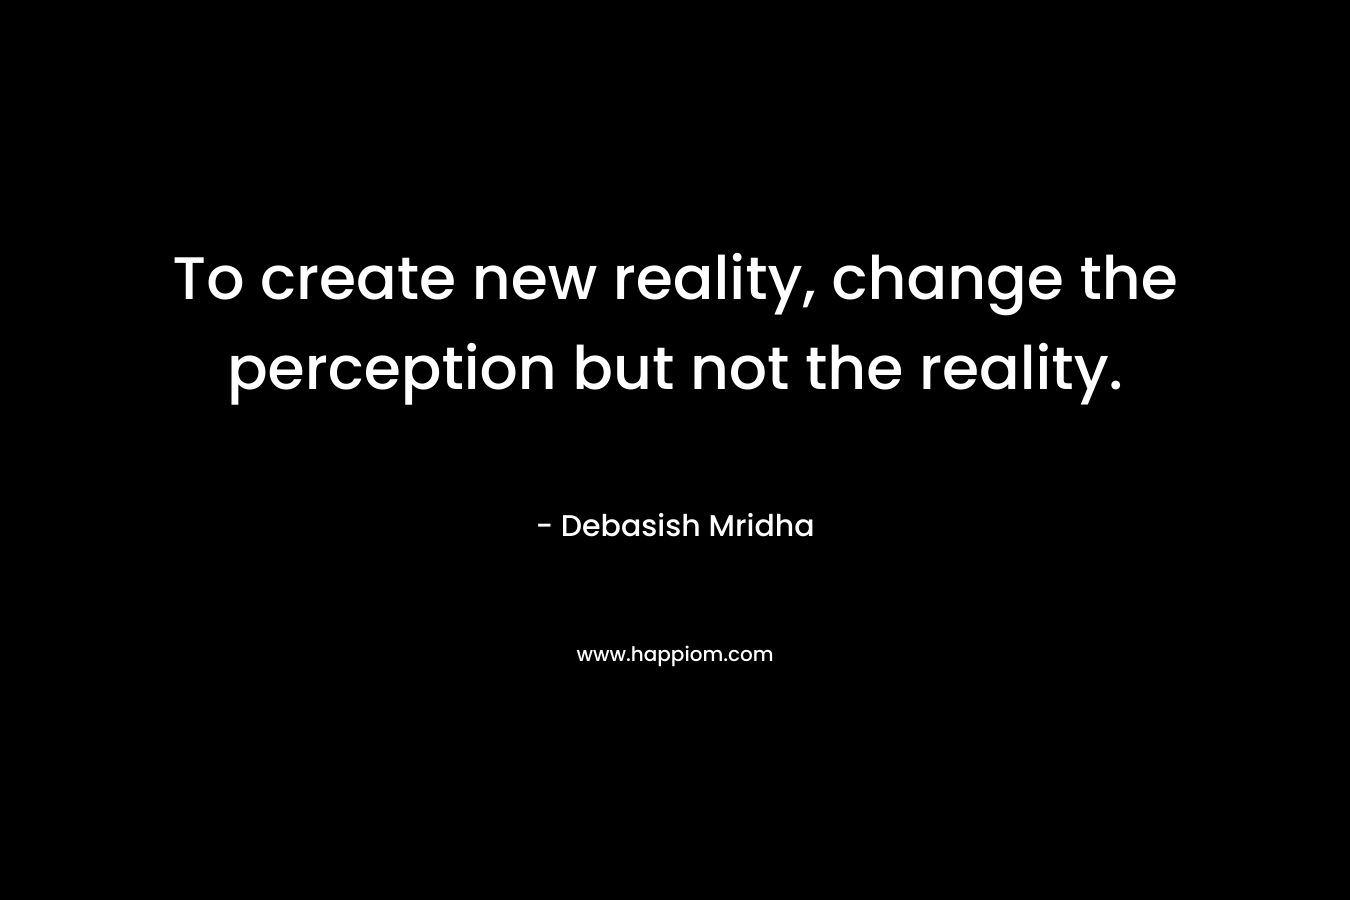 To create new reality, change the perception but not the reality.